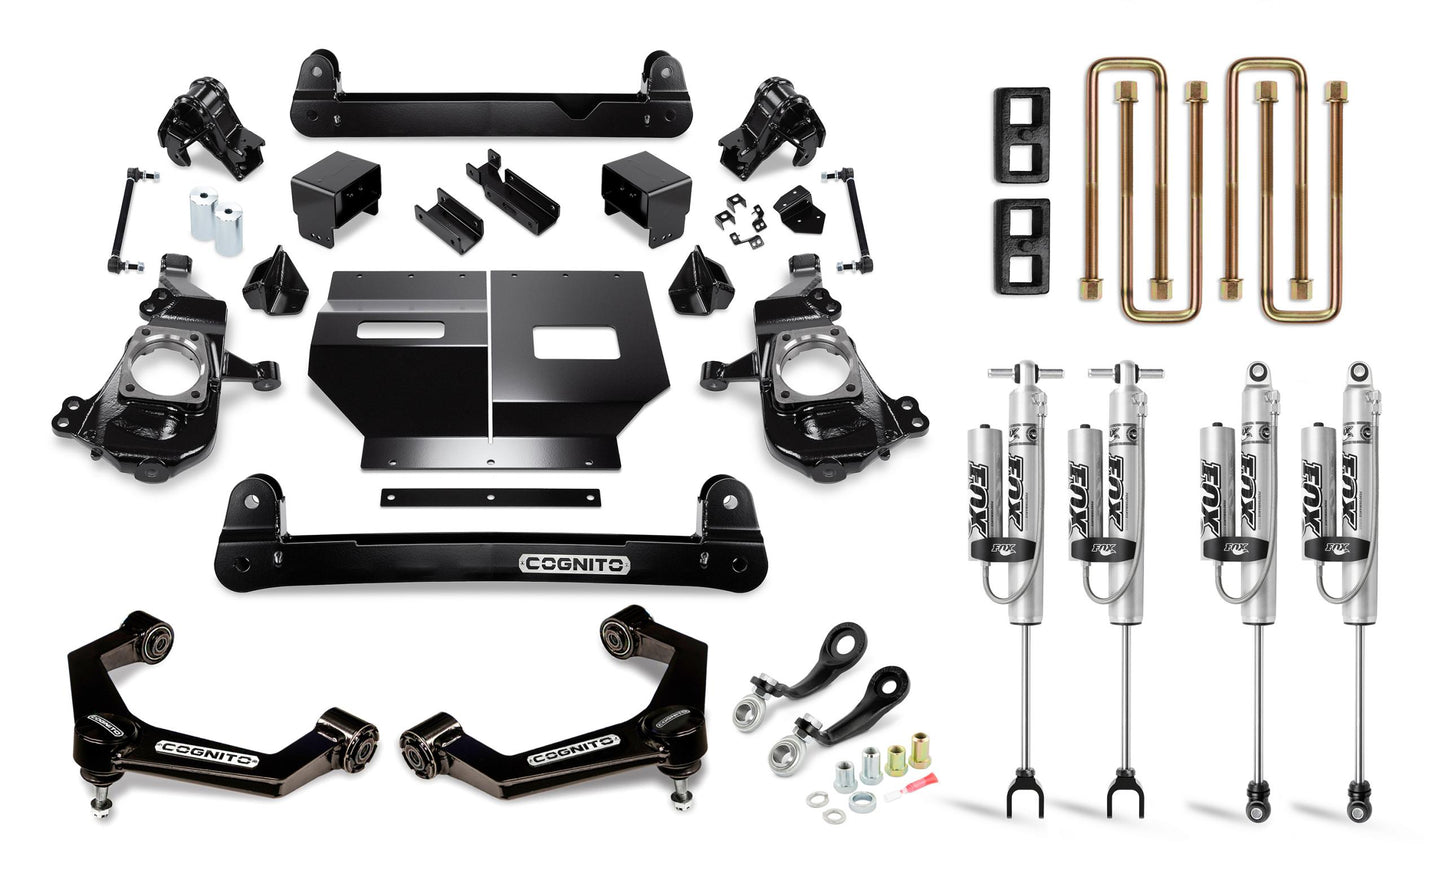 Cognito 4-Inch Performance Lift Kit with Fox PS 2.0 IFP Shocks for 20-24 Silverado/Sierra 2500/3500 2WD/4WD